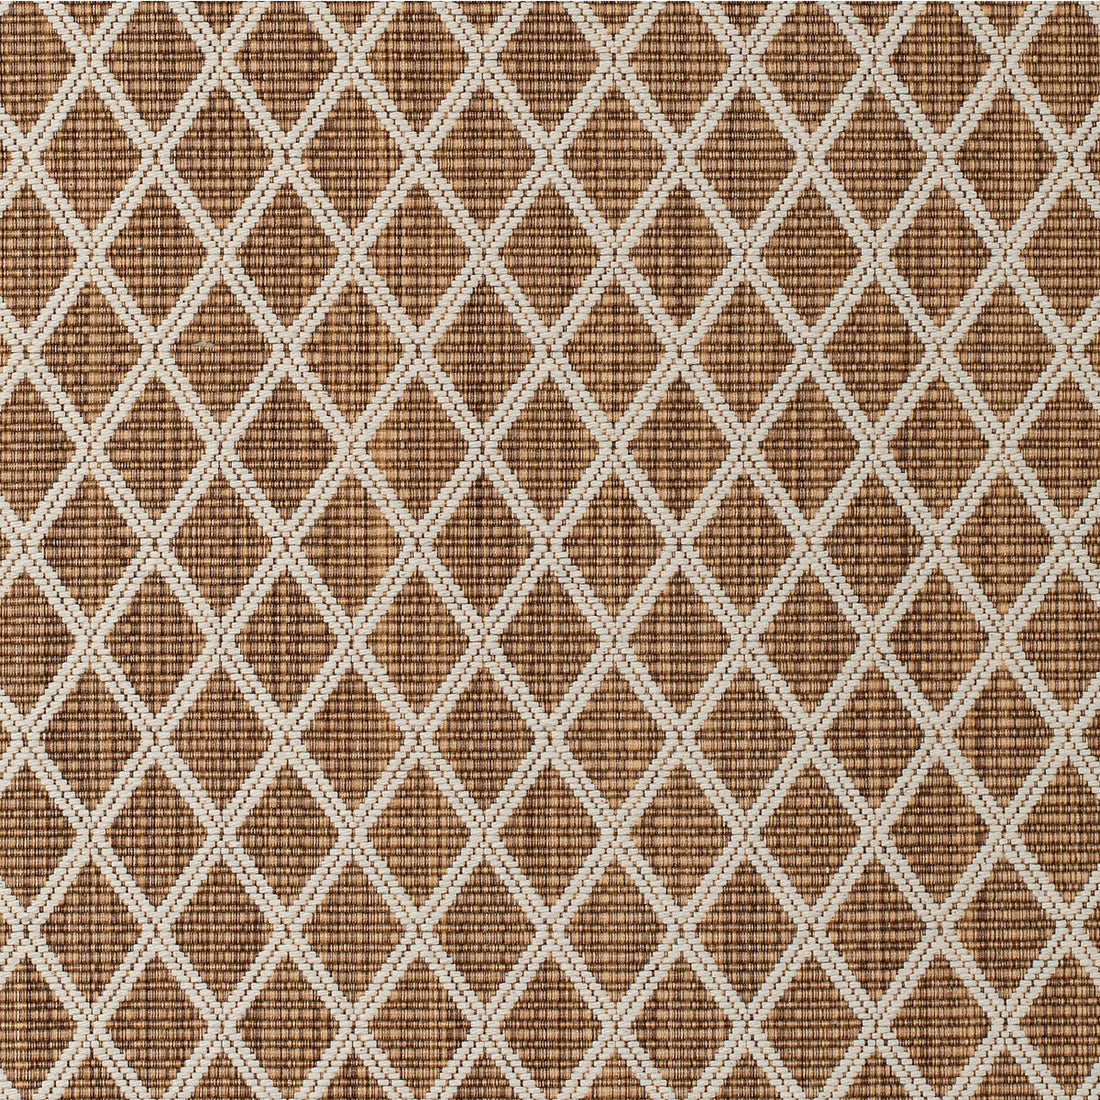 Cancale Woven fabric in brown color - pattern 8020109.6.0 - by Brunschwig &amp; Fils in the Granville Weaves collection